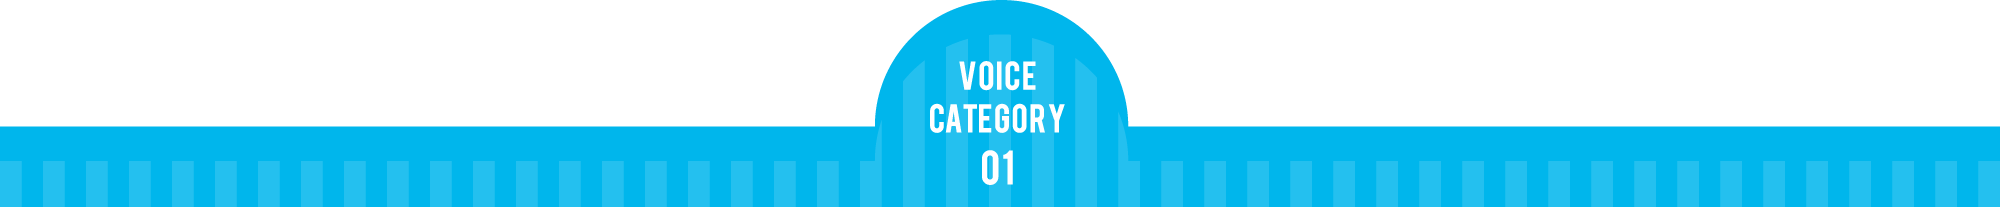 VOICE CATEGORY 01